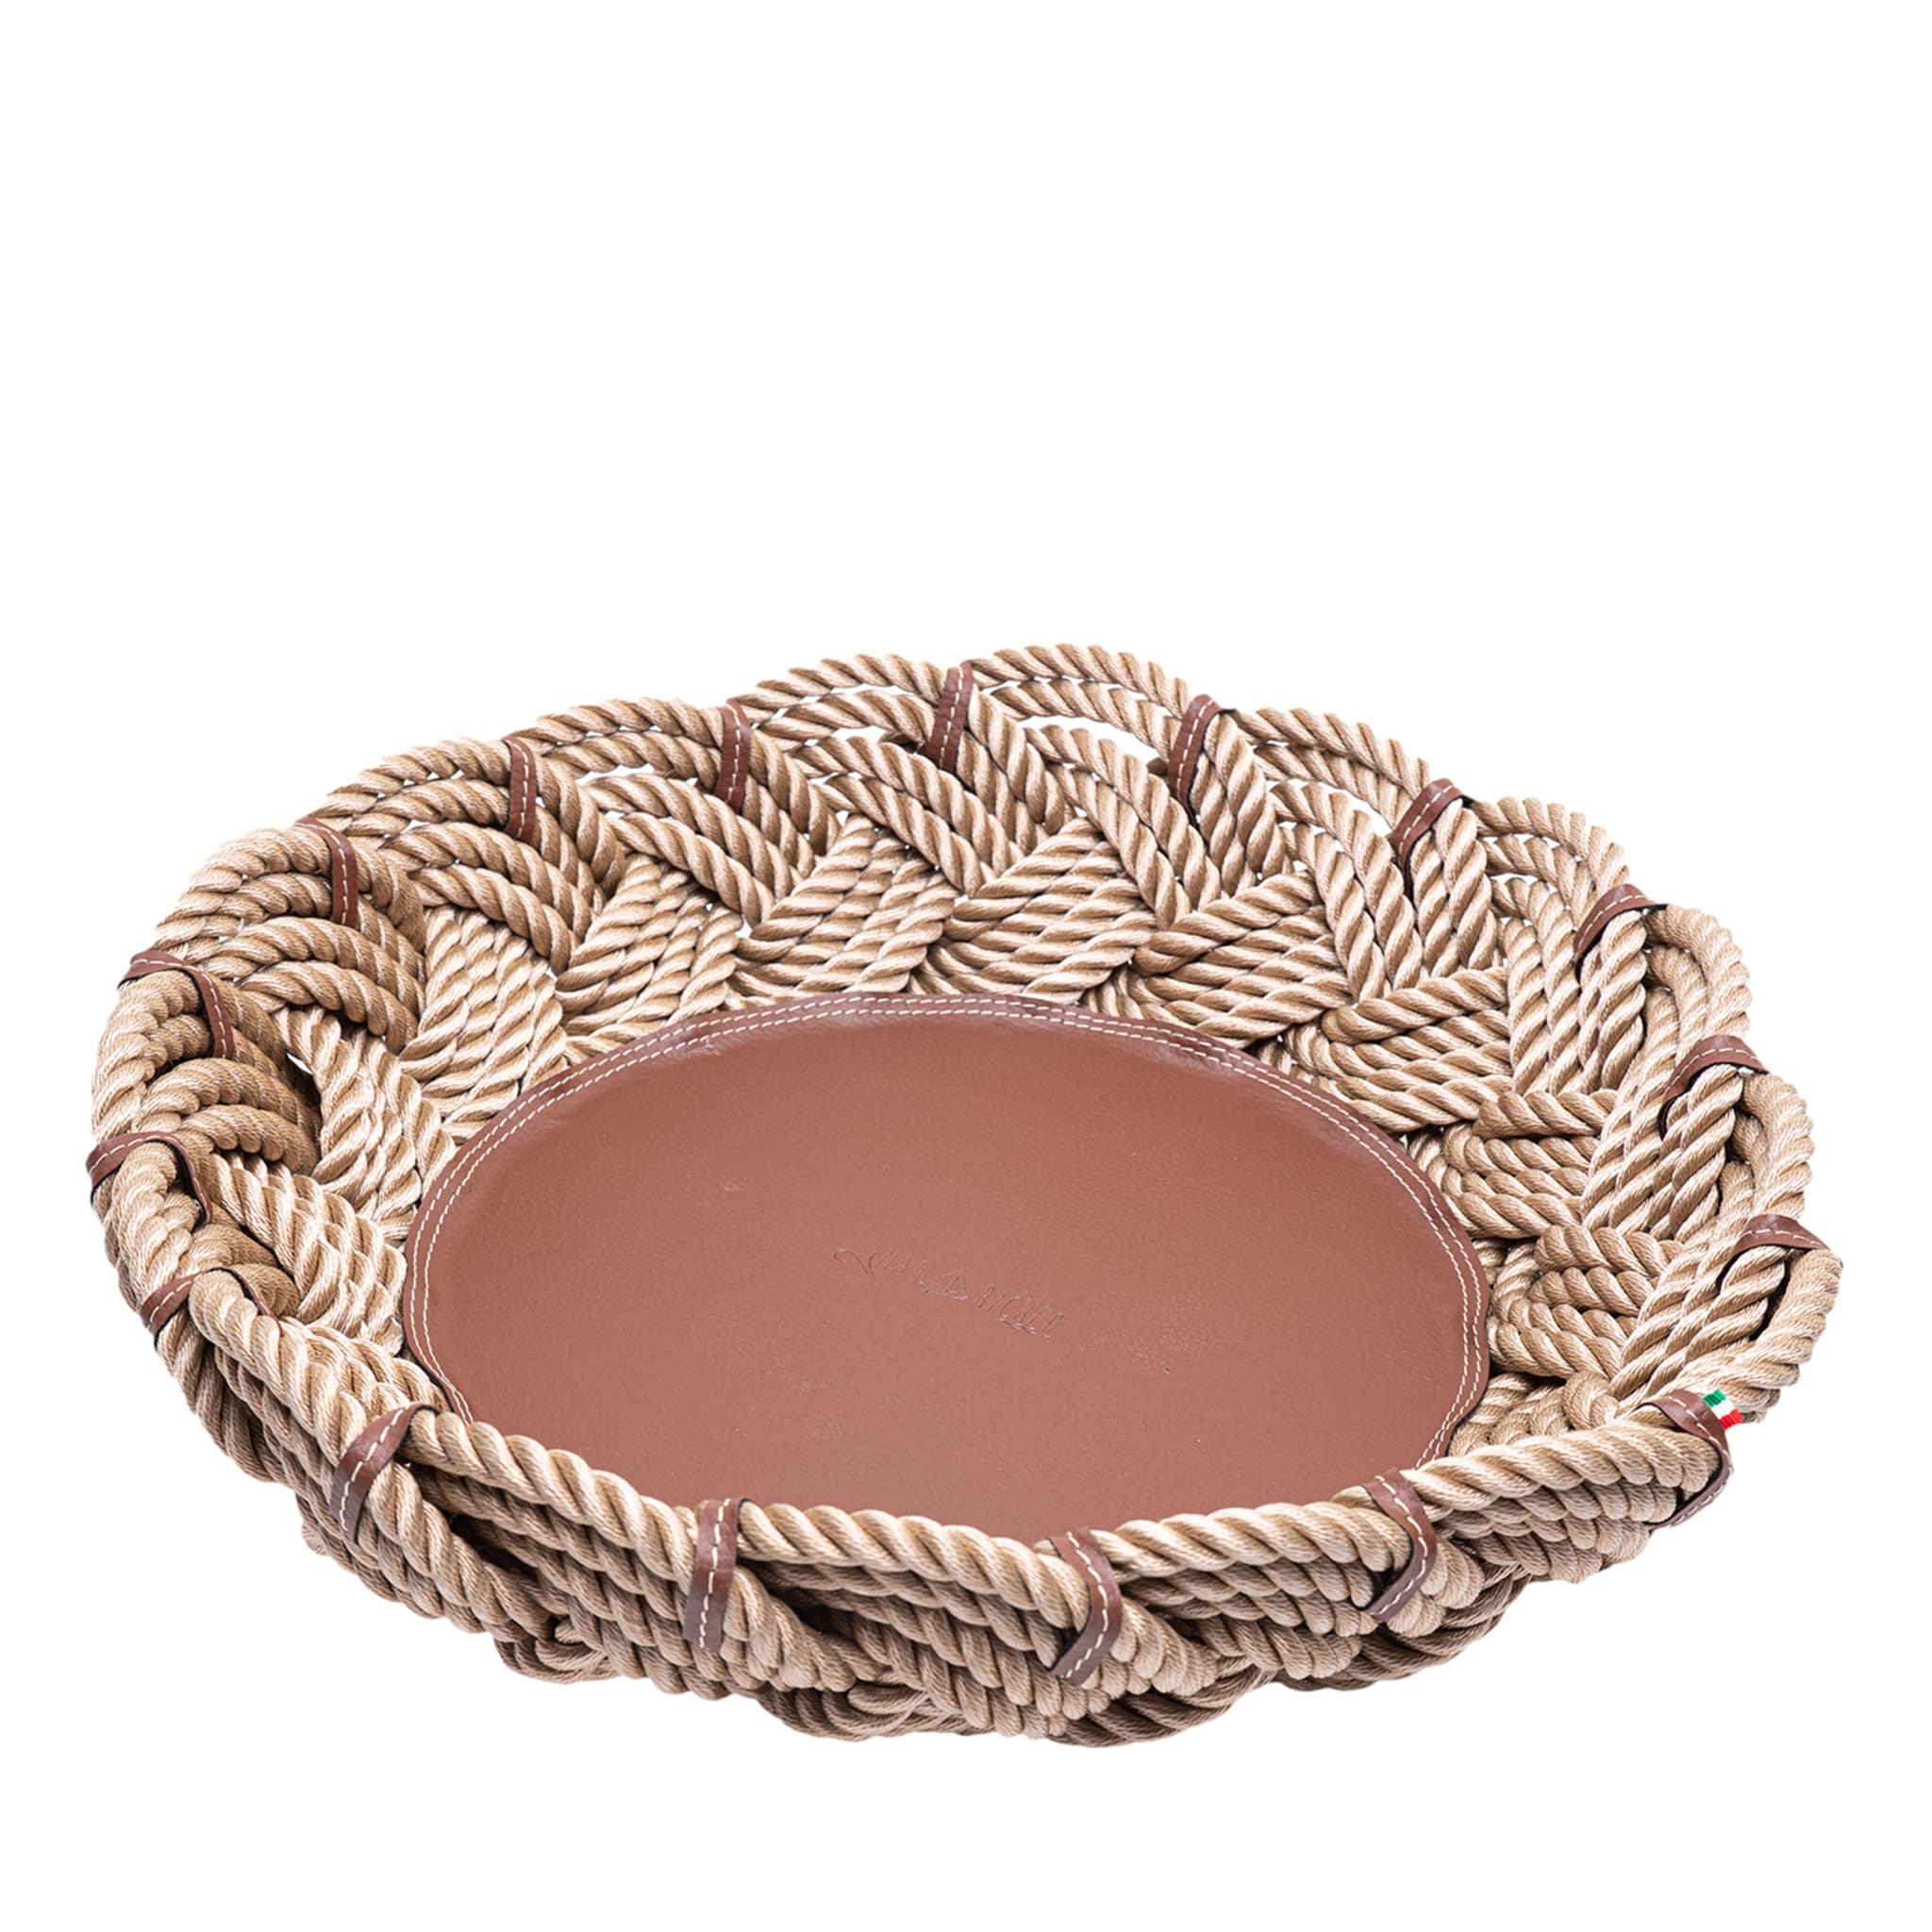 Extra-Large Beige Eco-Leather & Rope Centerpiece Bowl - Main view